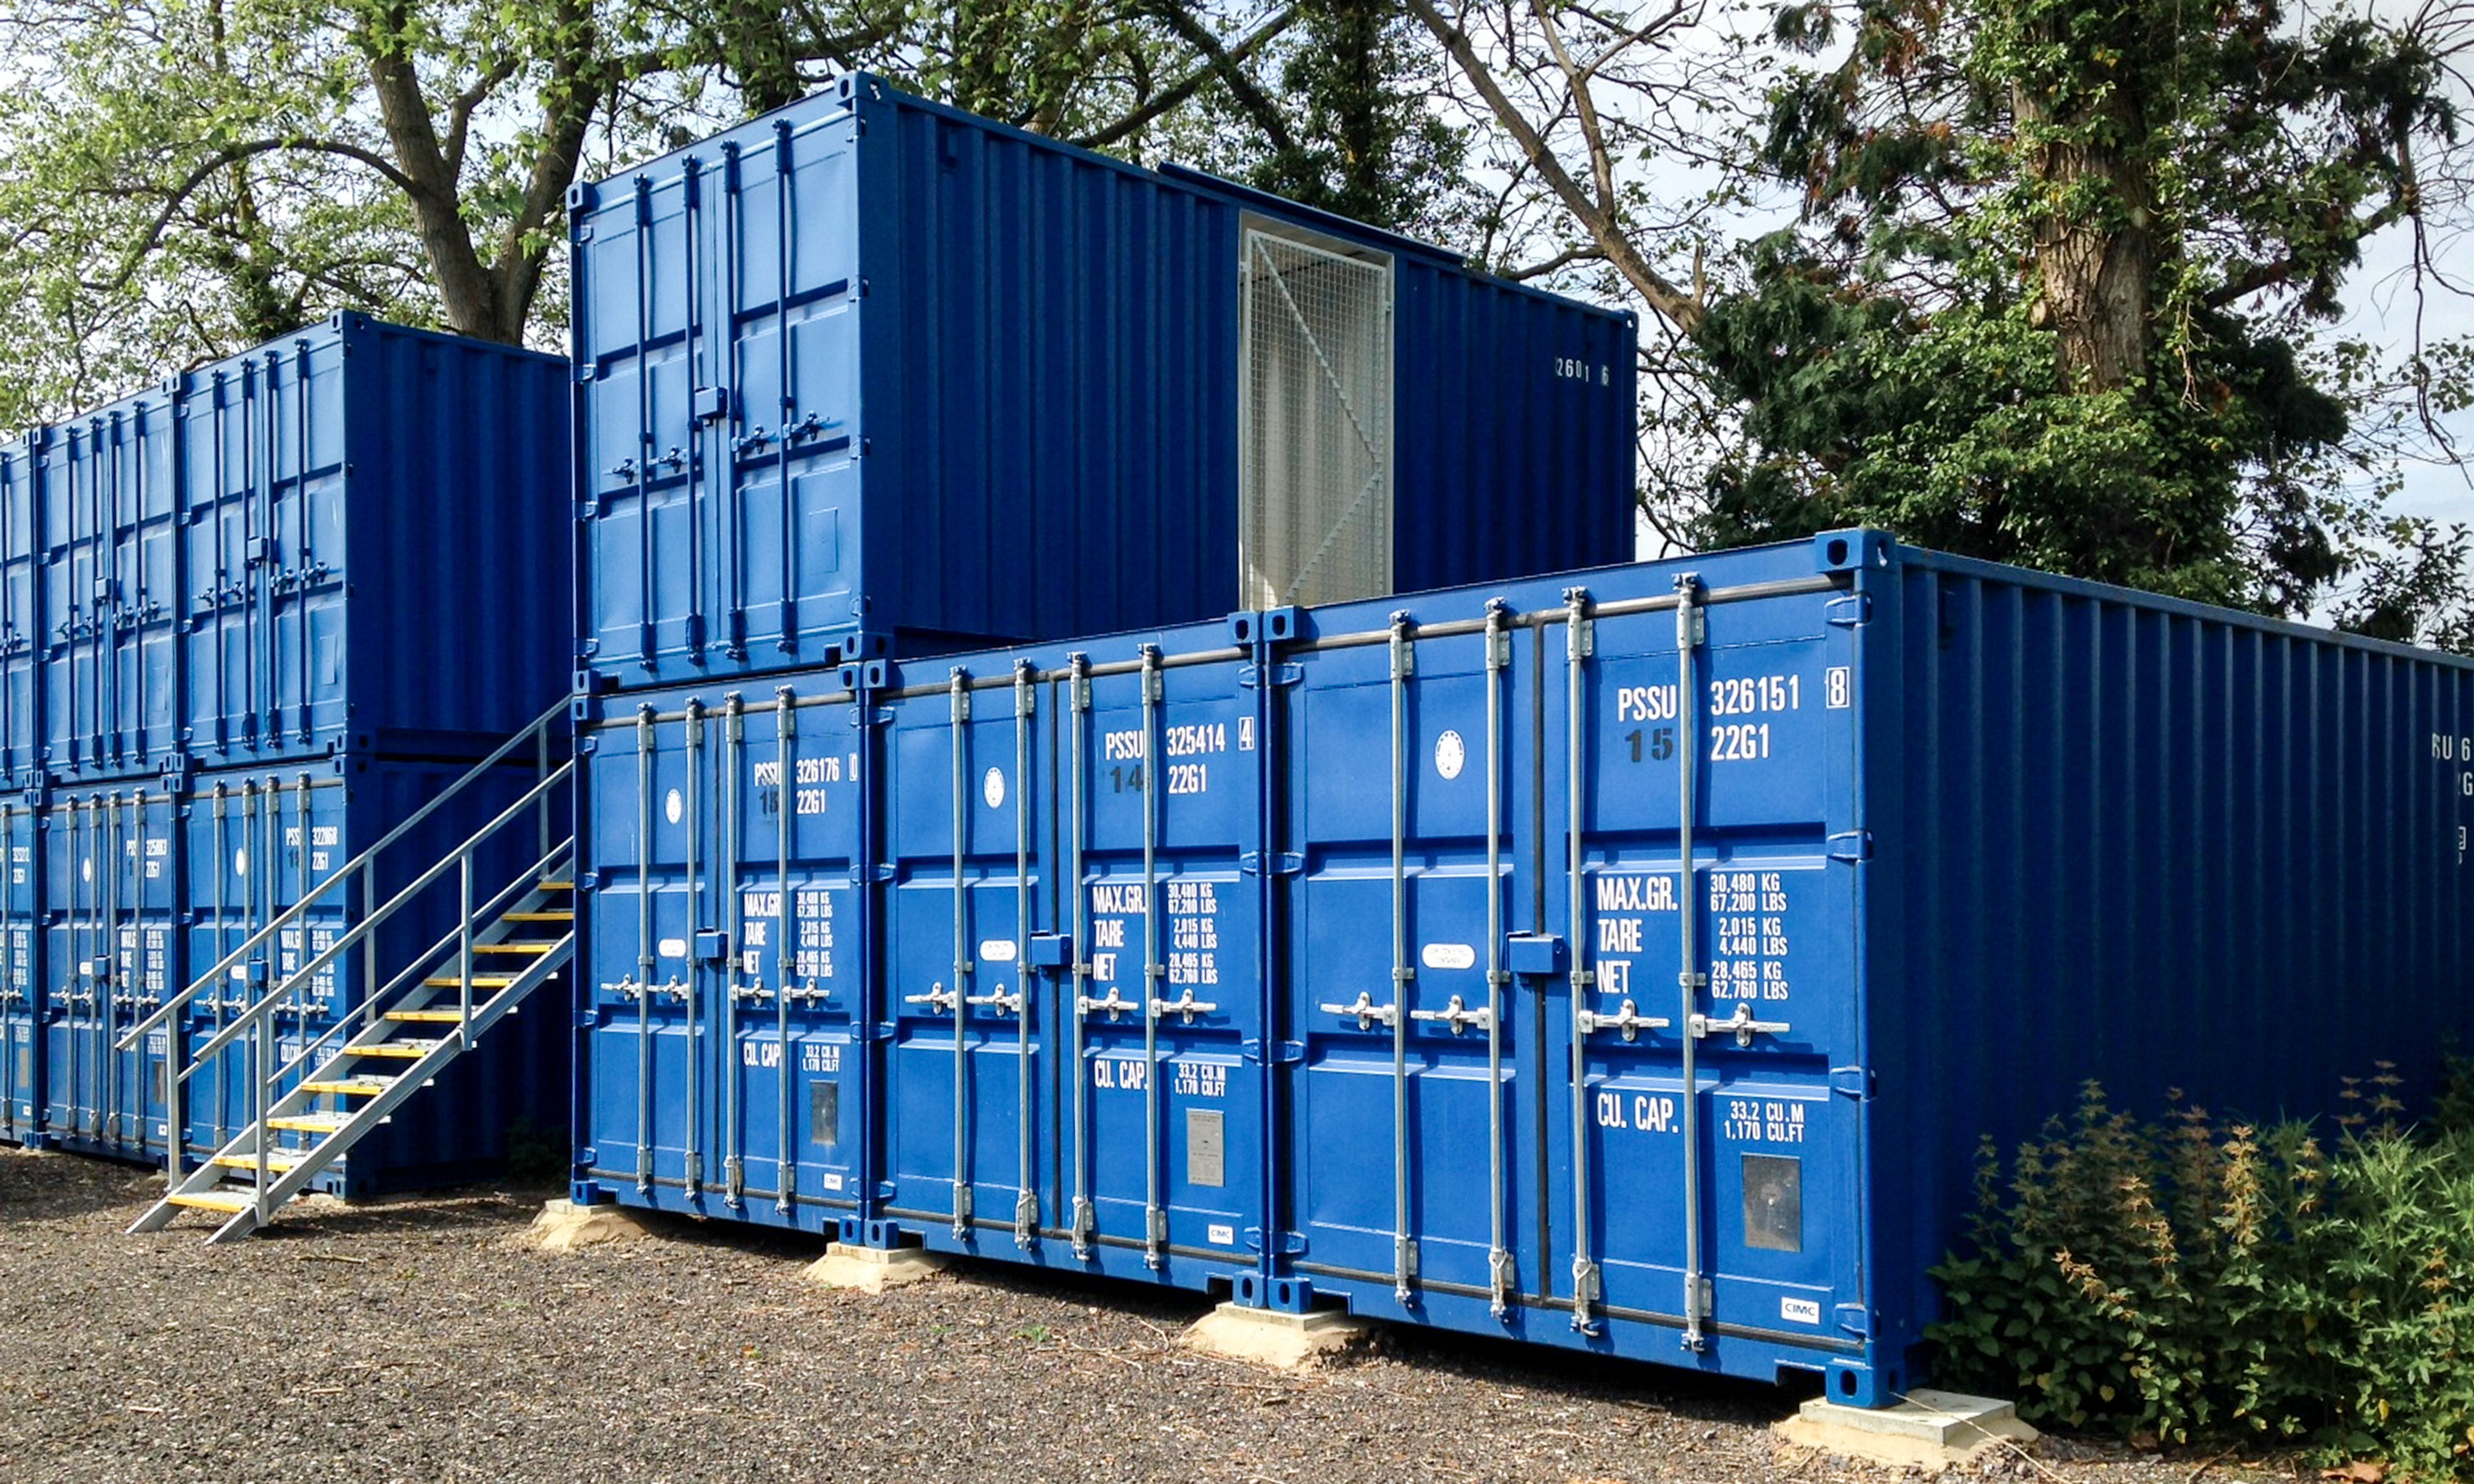 https://www.pentalvercontainerconversions.com/wp-content/uploads/sites/4/2020/10/Shipping-Container-Storage-Solutions-Masthead.jpg